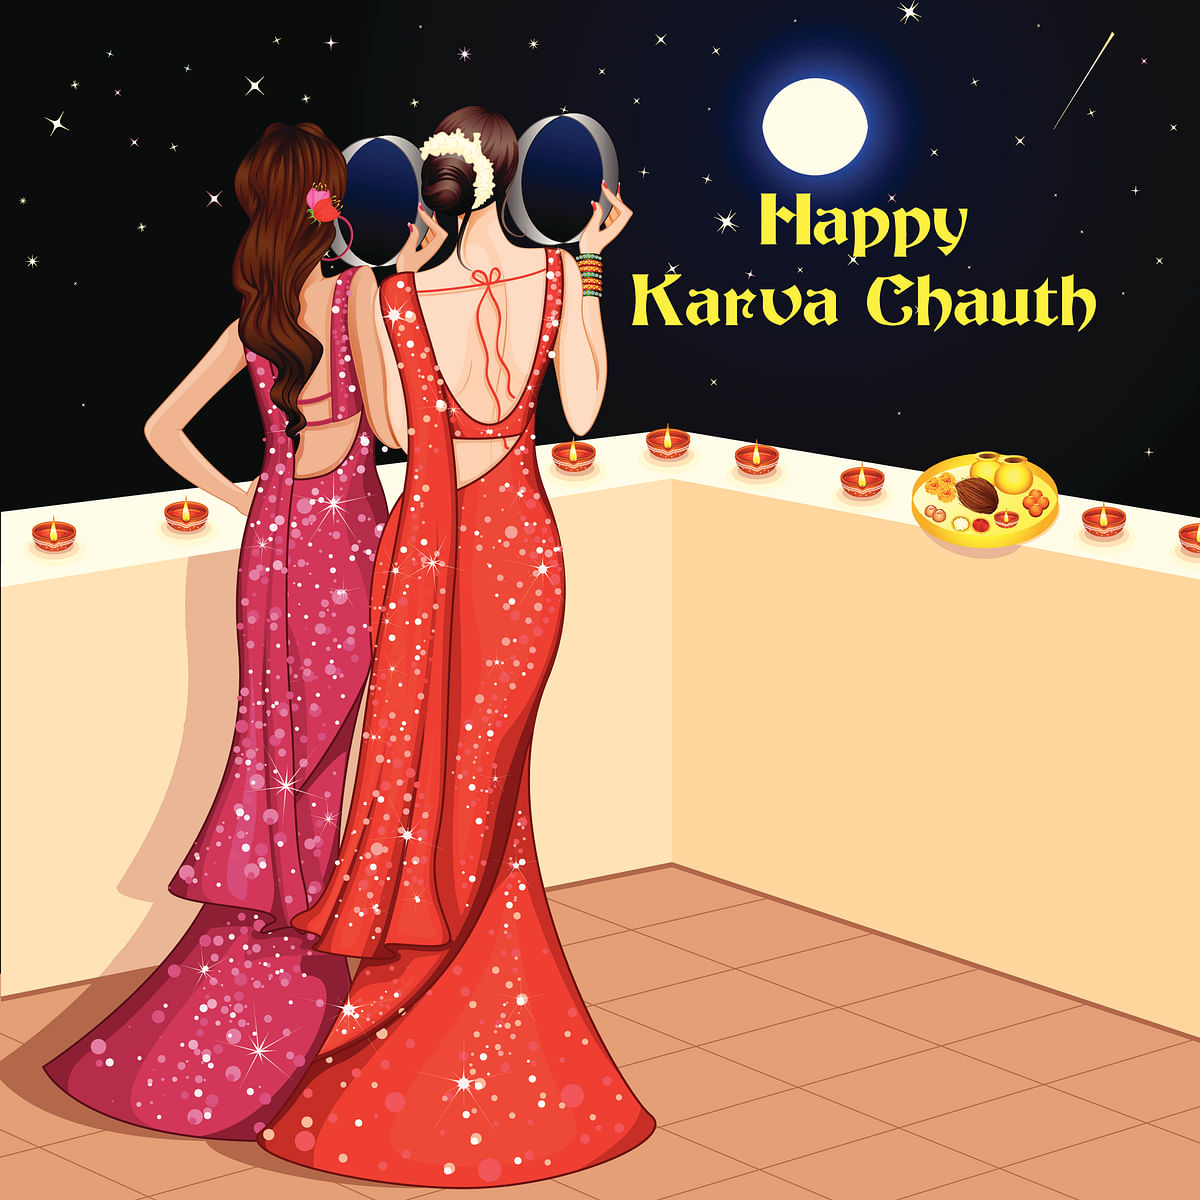 The fast is observed on Chauth or the fourth day after the Purnima of Kartik month in the Hindu calendar. 